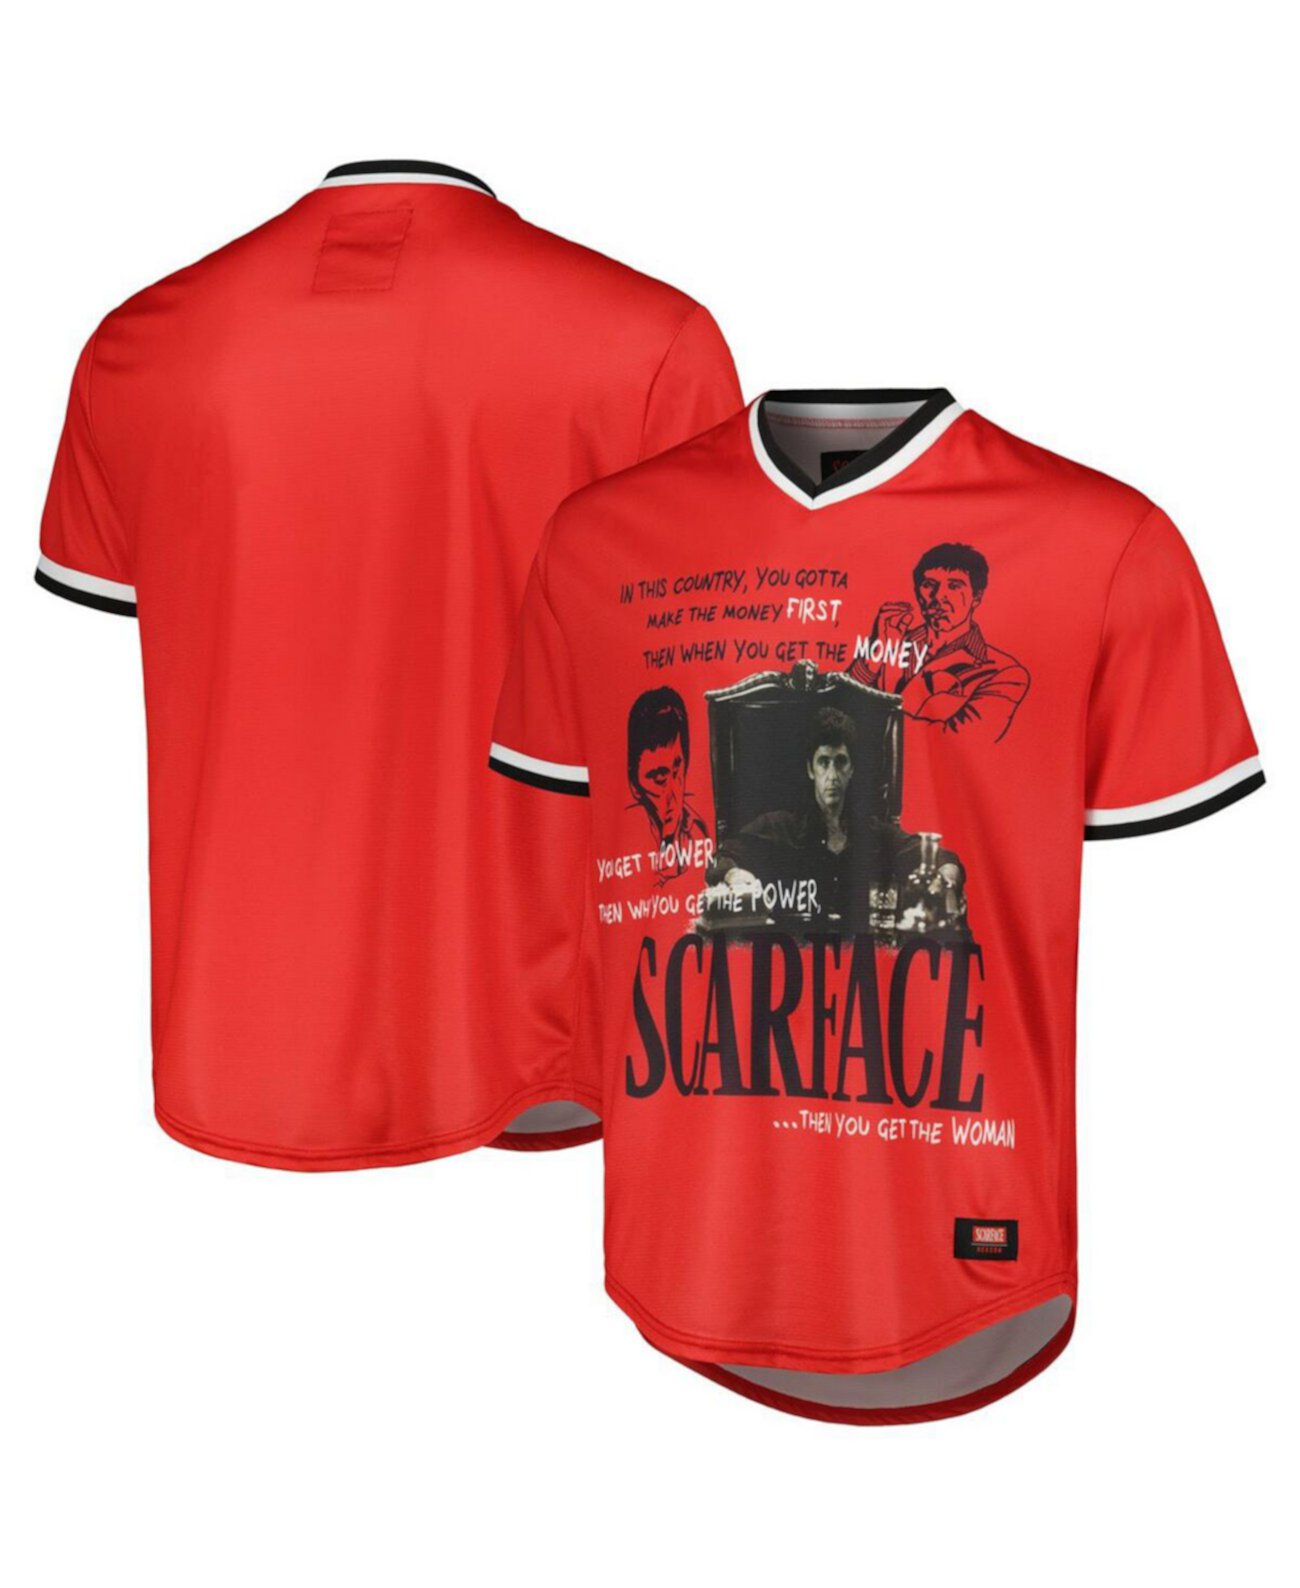 Men's and Women's Red Scarface Baseball Jersey Reason